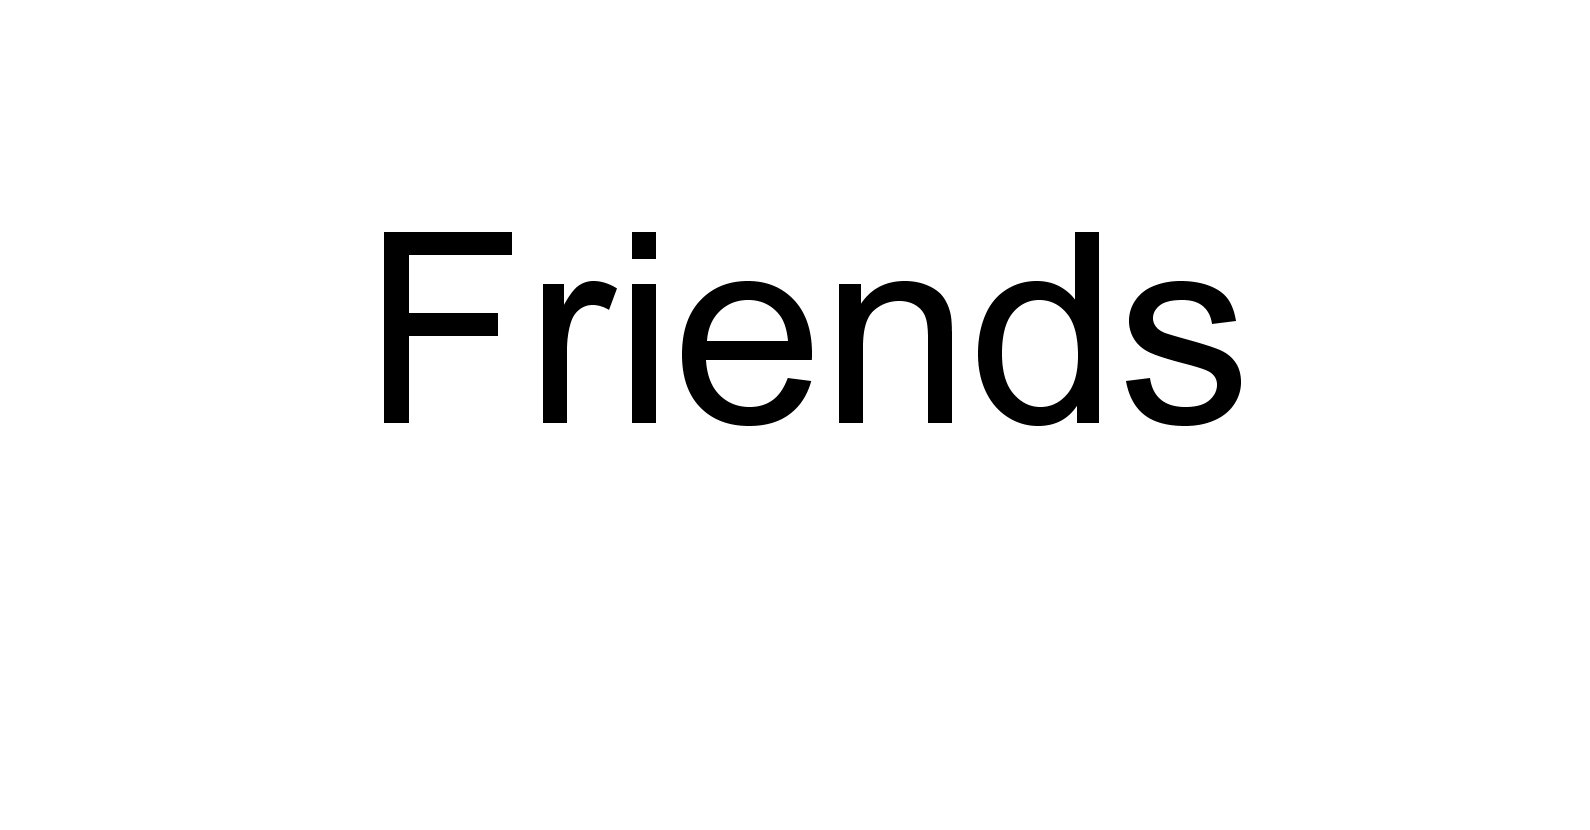 Our Friends